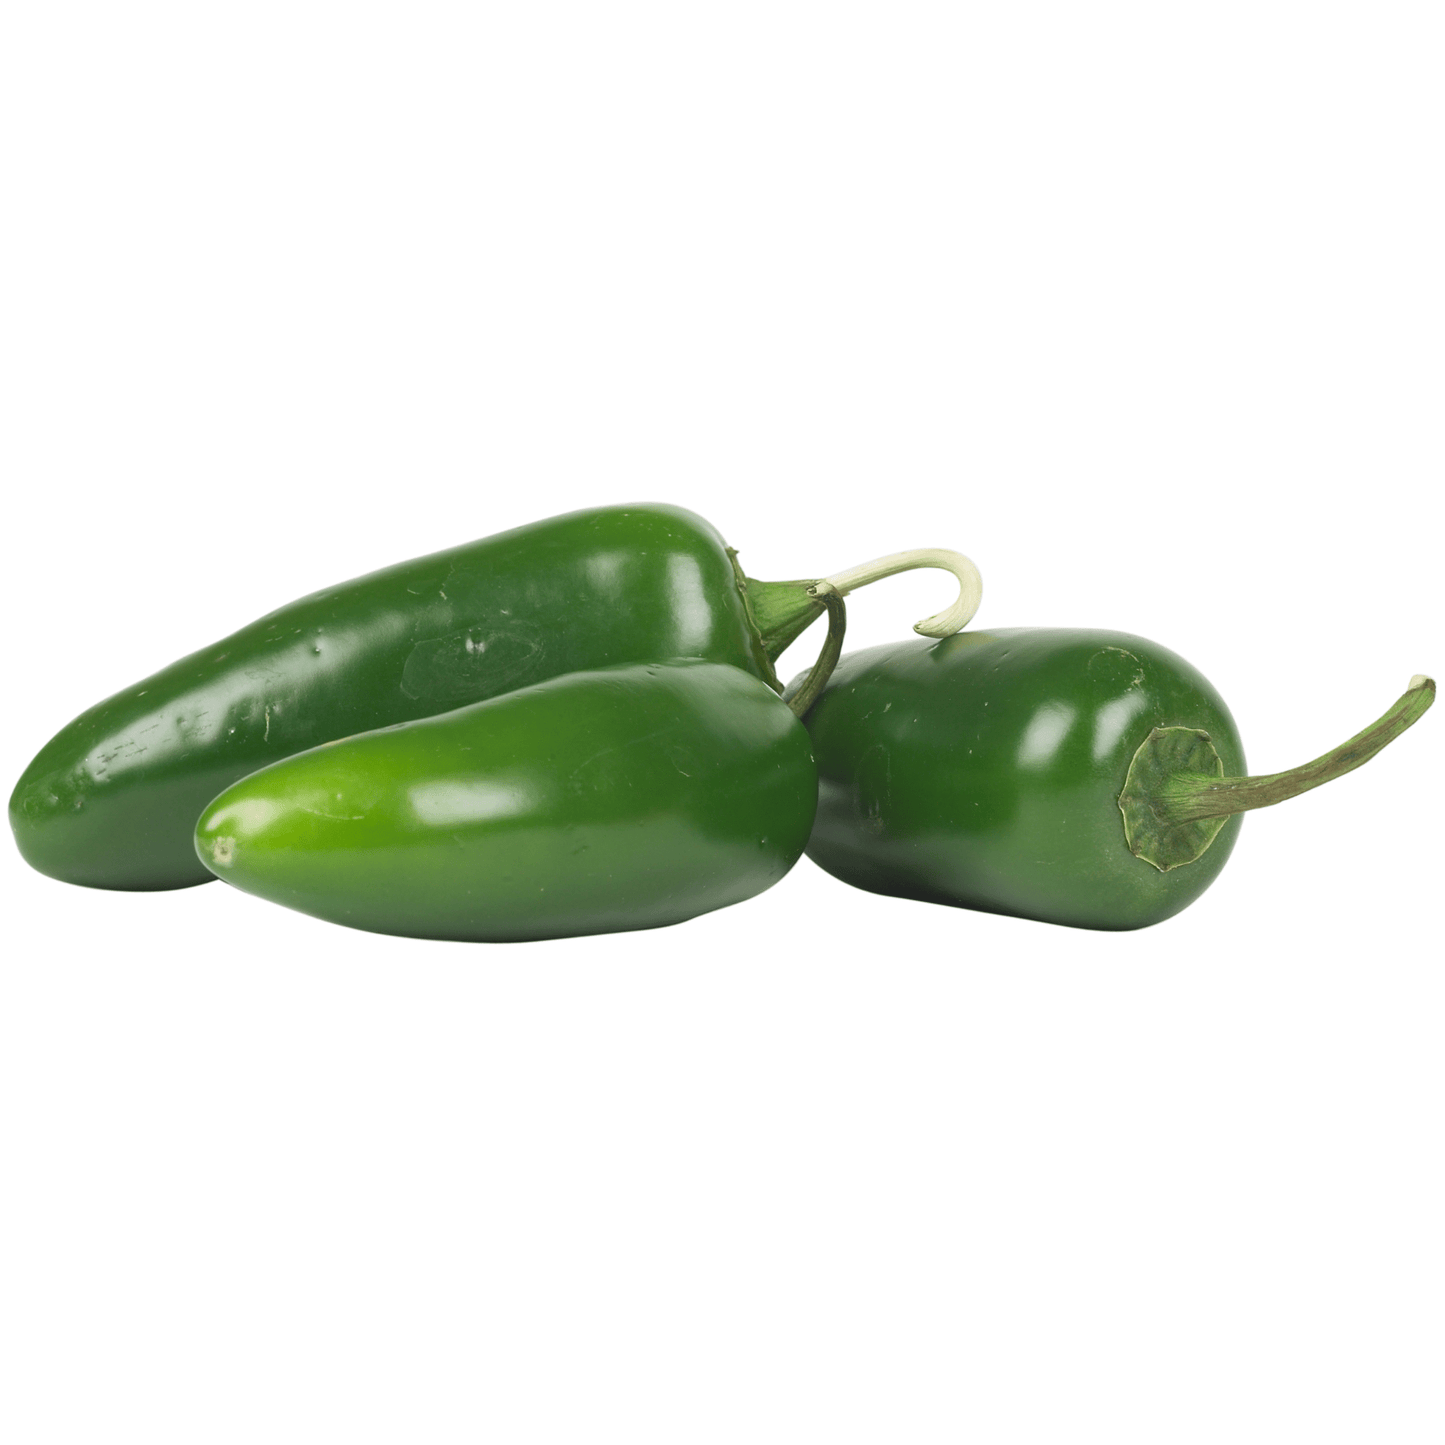 Jalapeno Peppers - Hasty Roots